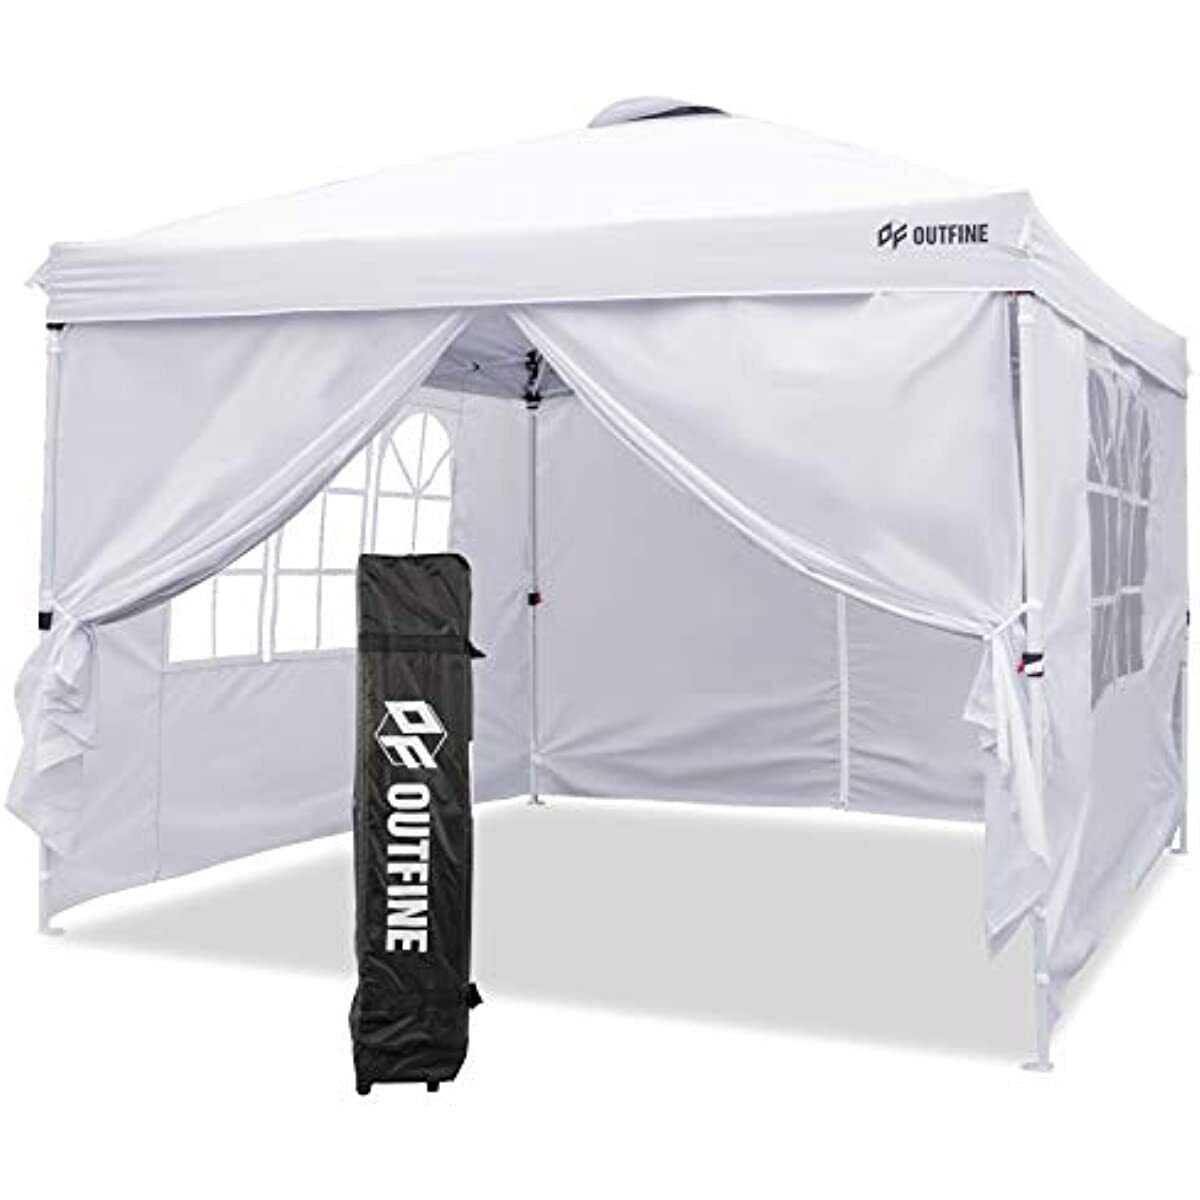 OUTFINE Canopy 10'x10' Pop Up Commercial Instant Gazebo Tent, White, 10*10FT